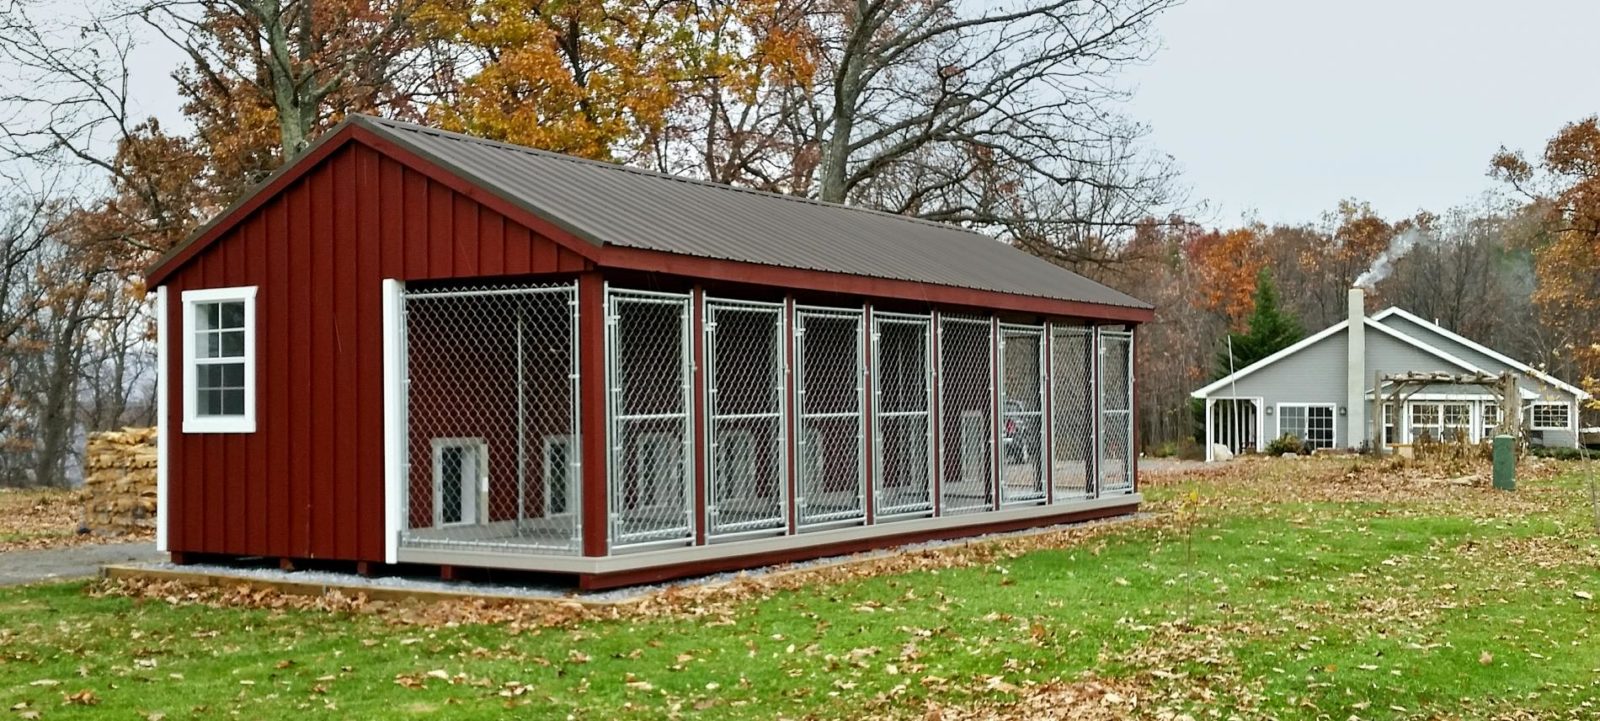 commercial insulated dog kennel house